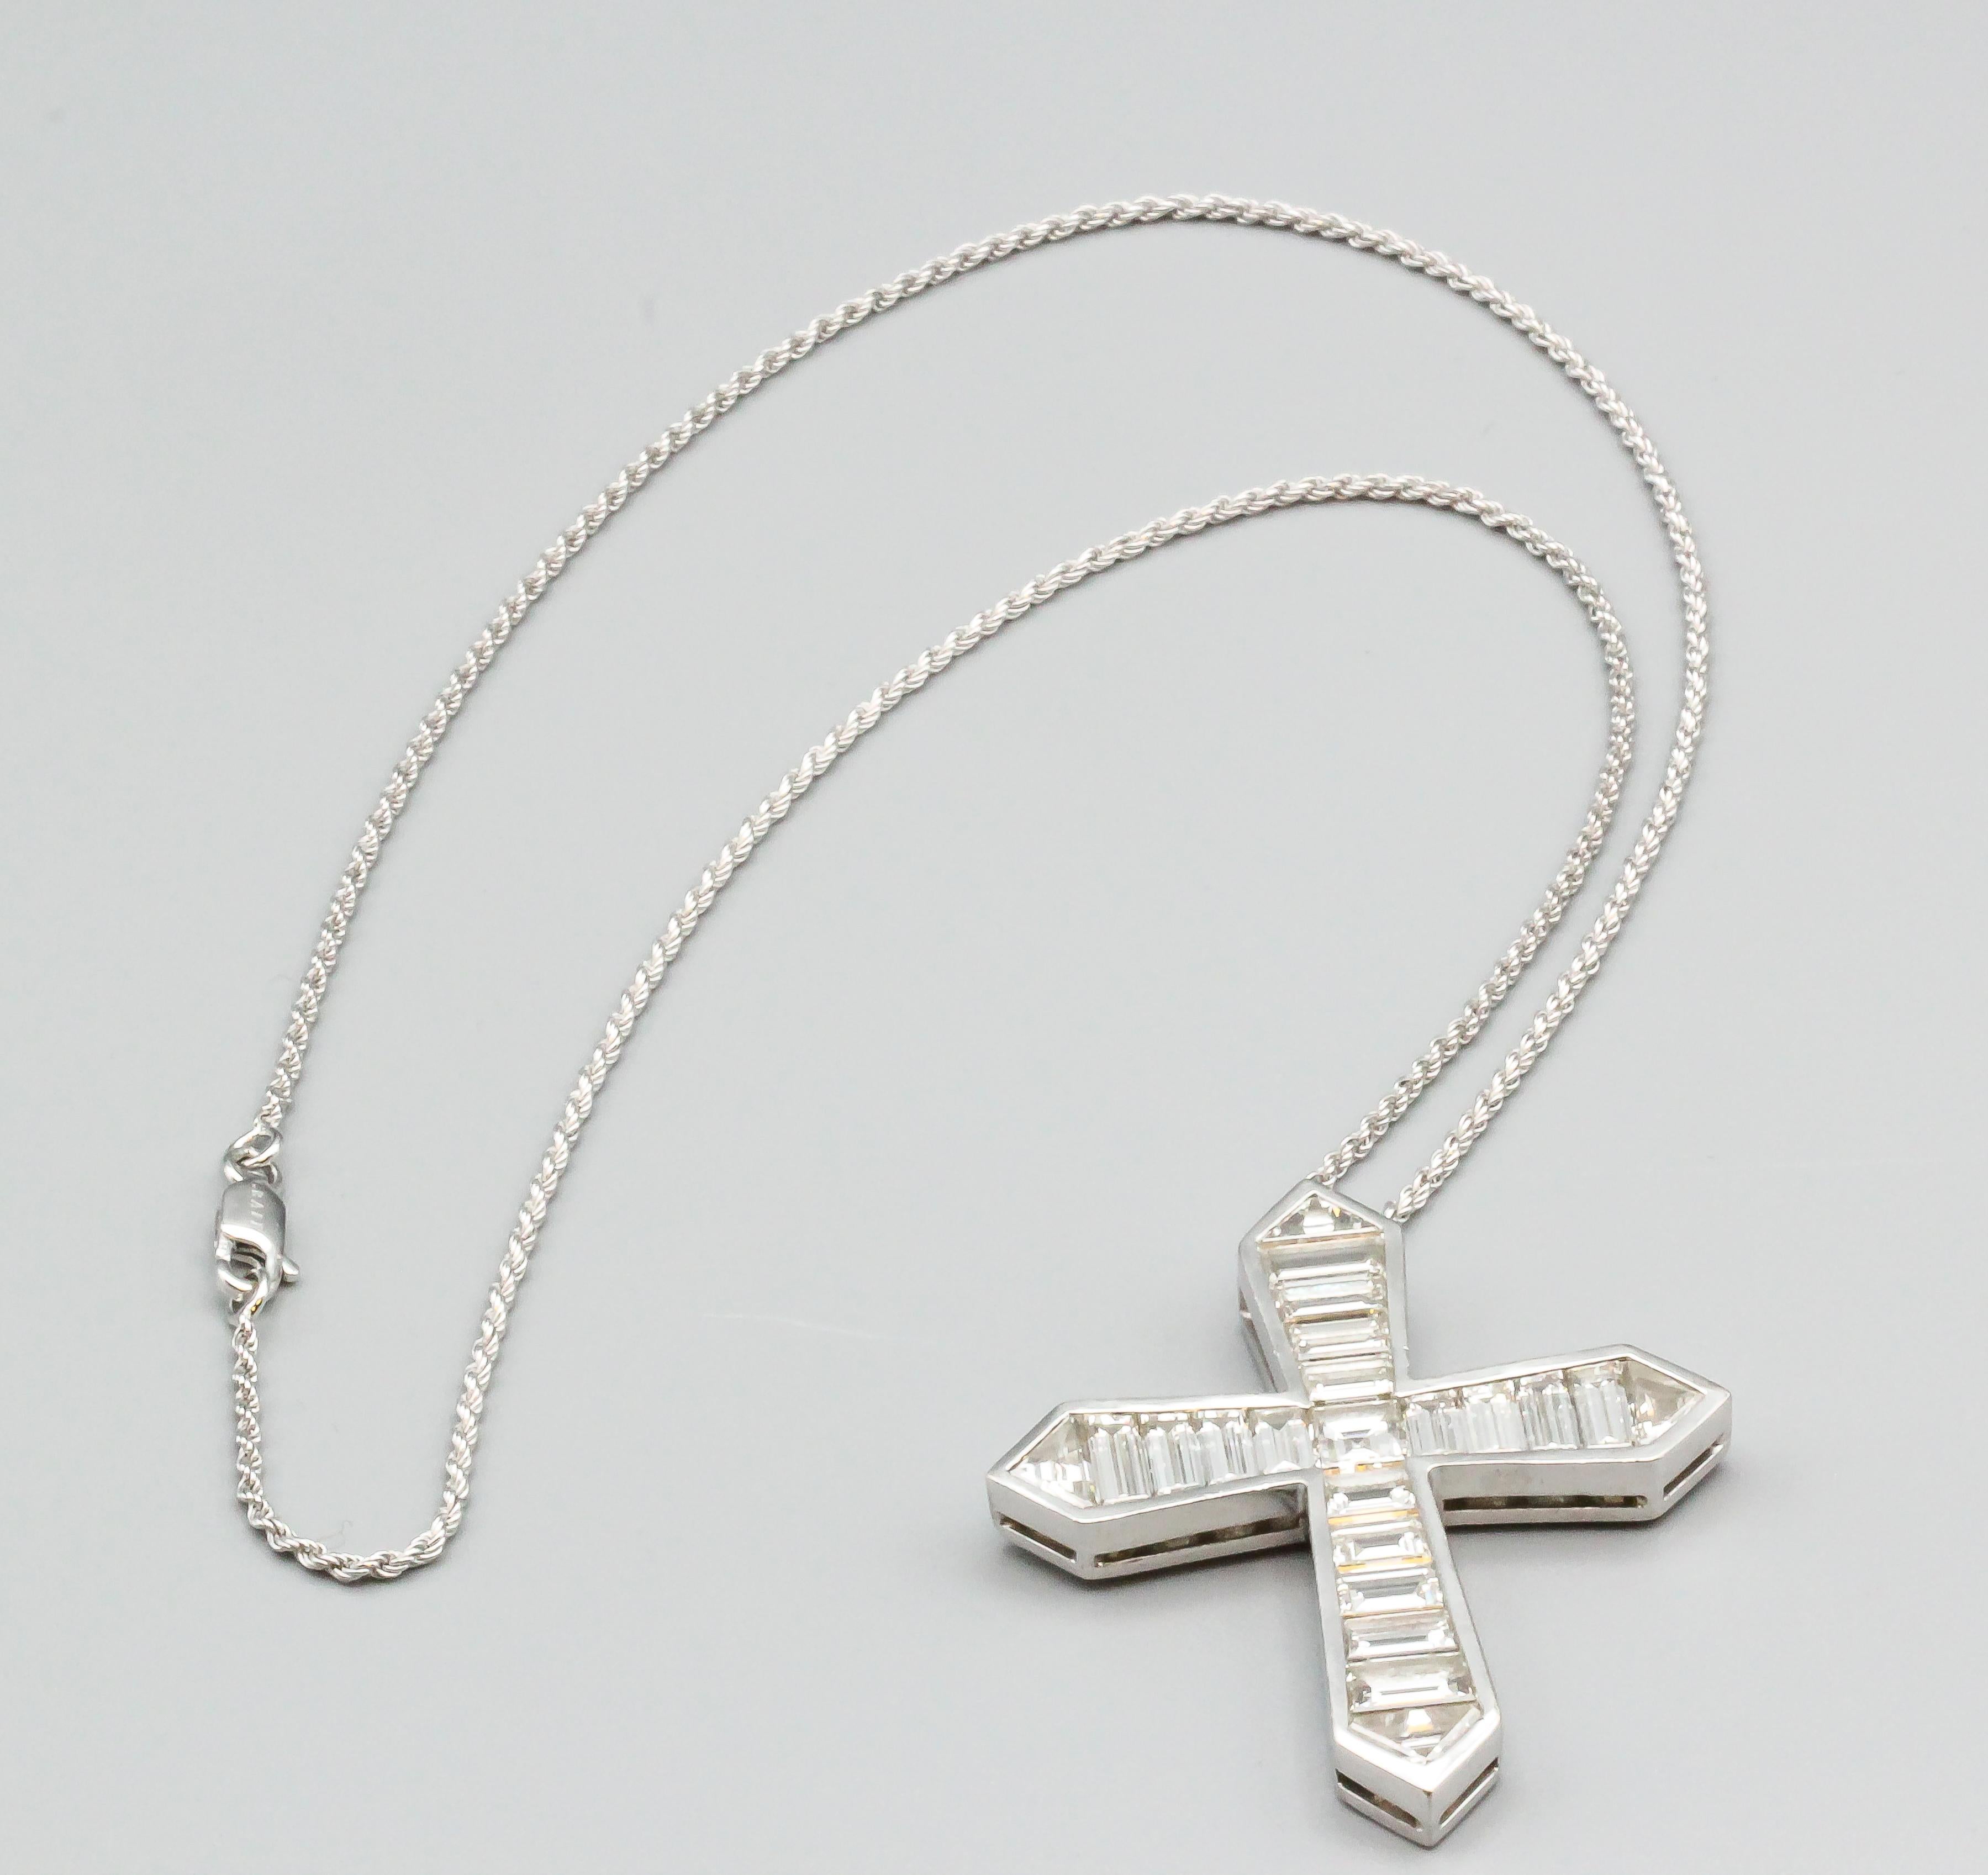 Very fine diamond and 18K white gold cross pendant necklace by Graff. It features high grade square step cut, trapezoid cut and triangle cut diamonds, approx. 8.0-10.0cts total weight. Pendant measures 2